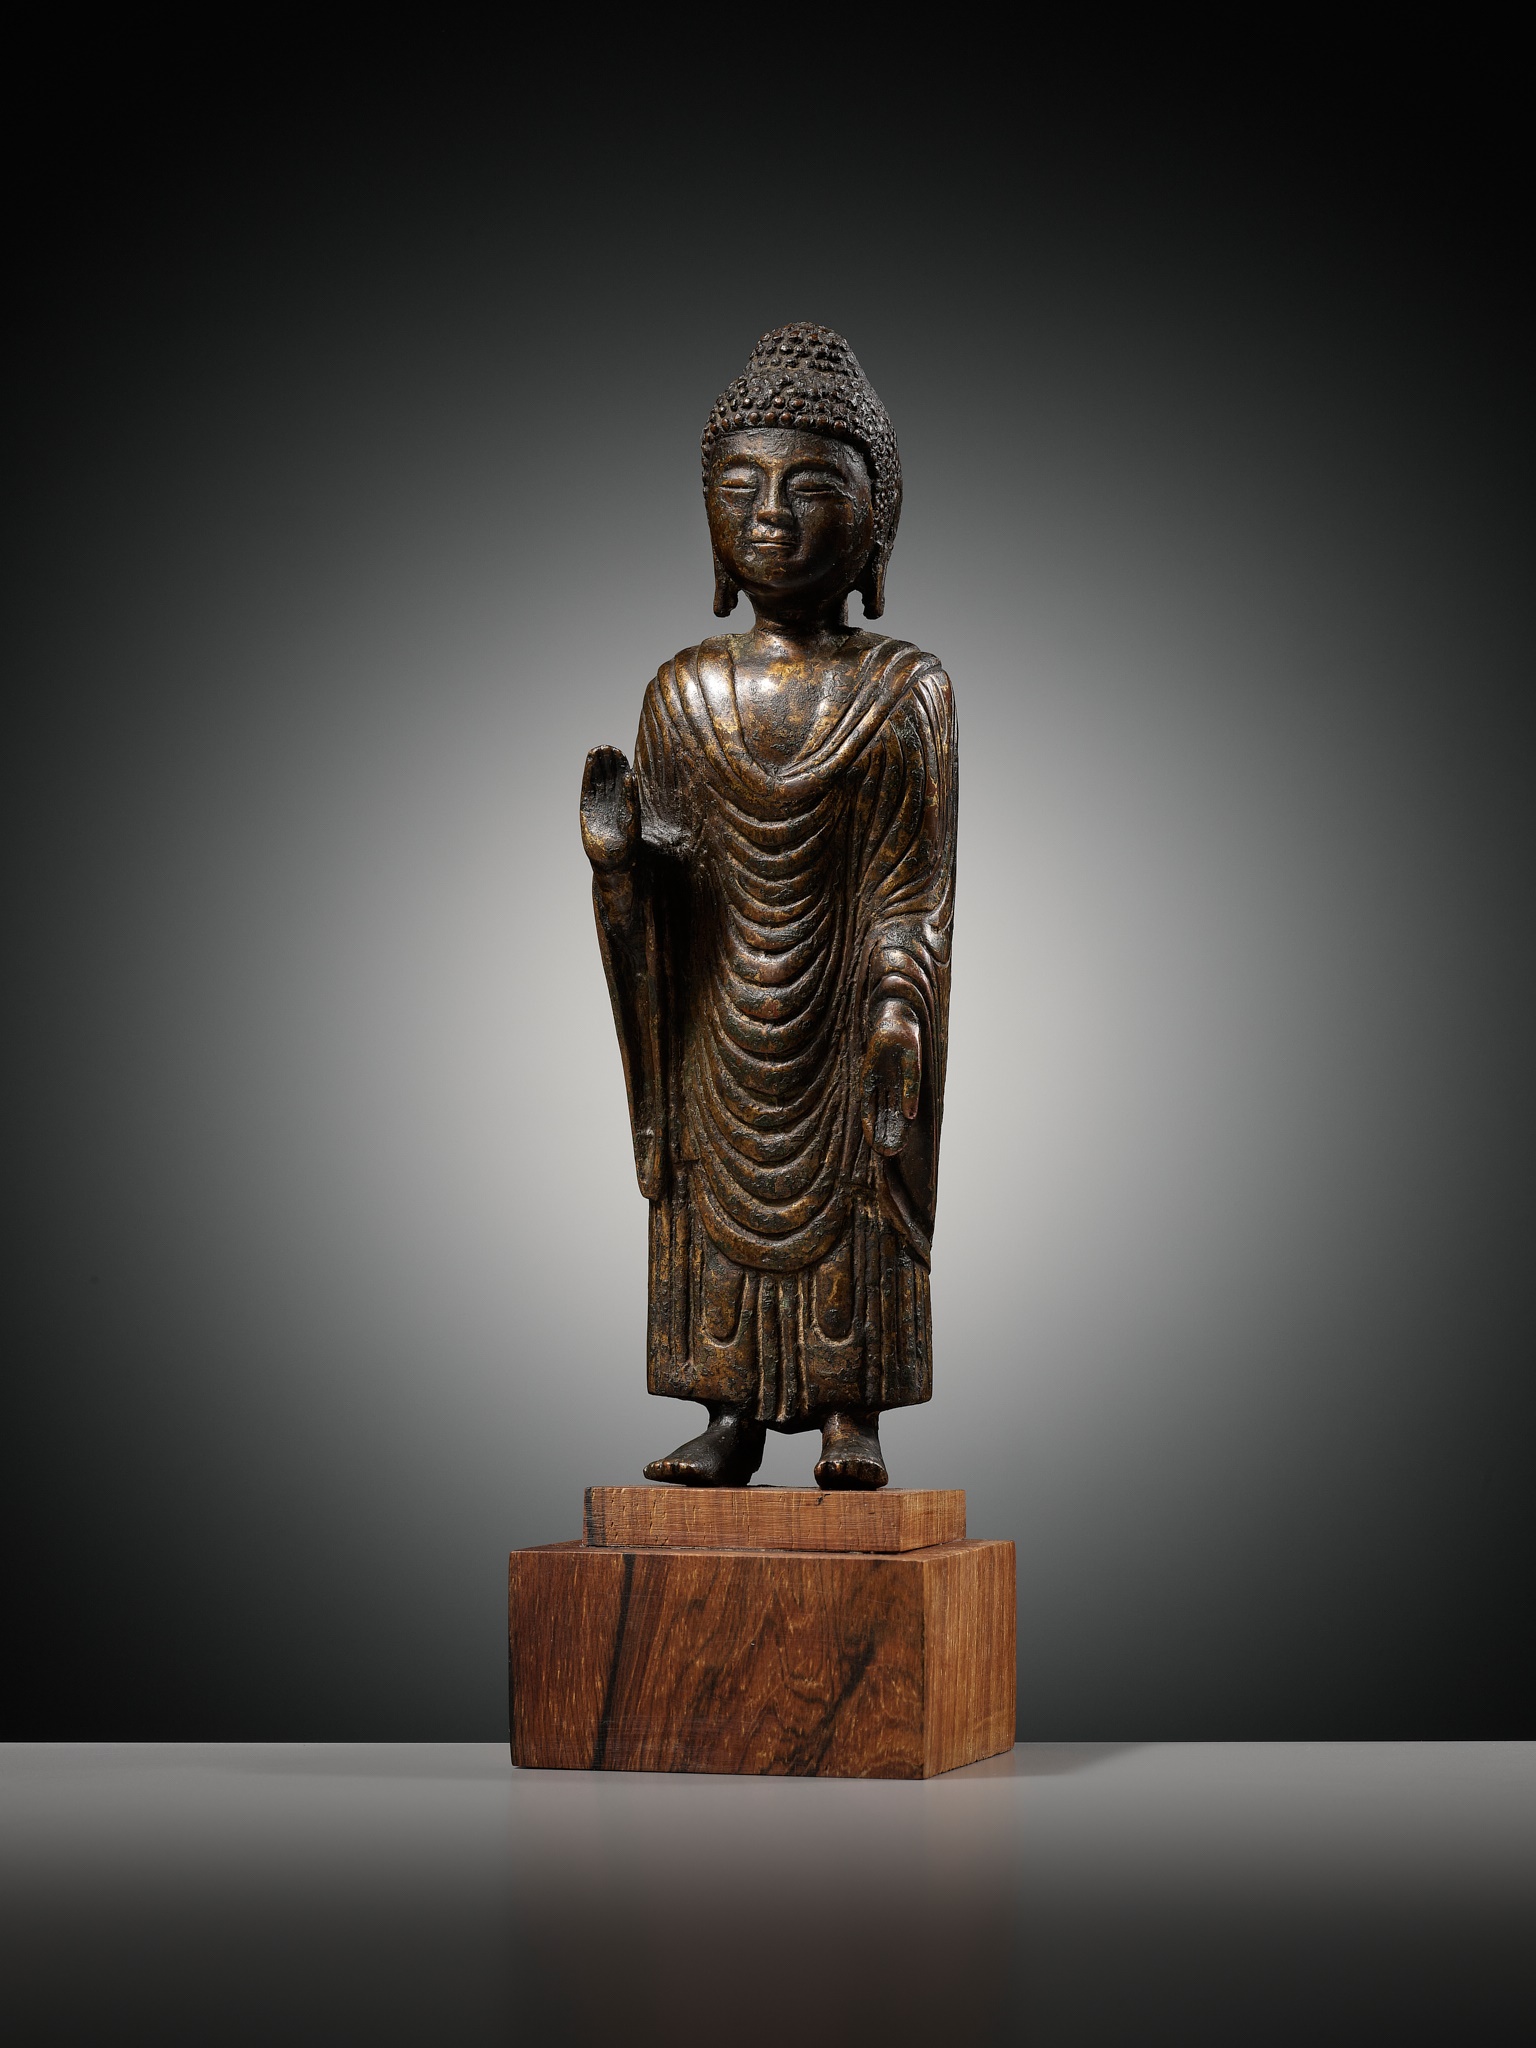 A GILT-BRONZE STANDING FIGURE OF BUDDHA, UNIFIED SILLA DYNASTY, KOREA, 8TH - 9TH CENTURY - Image 2 of 12